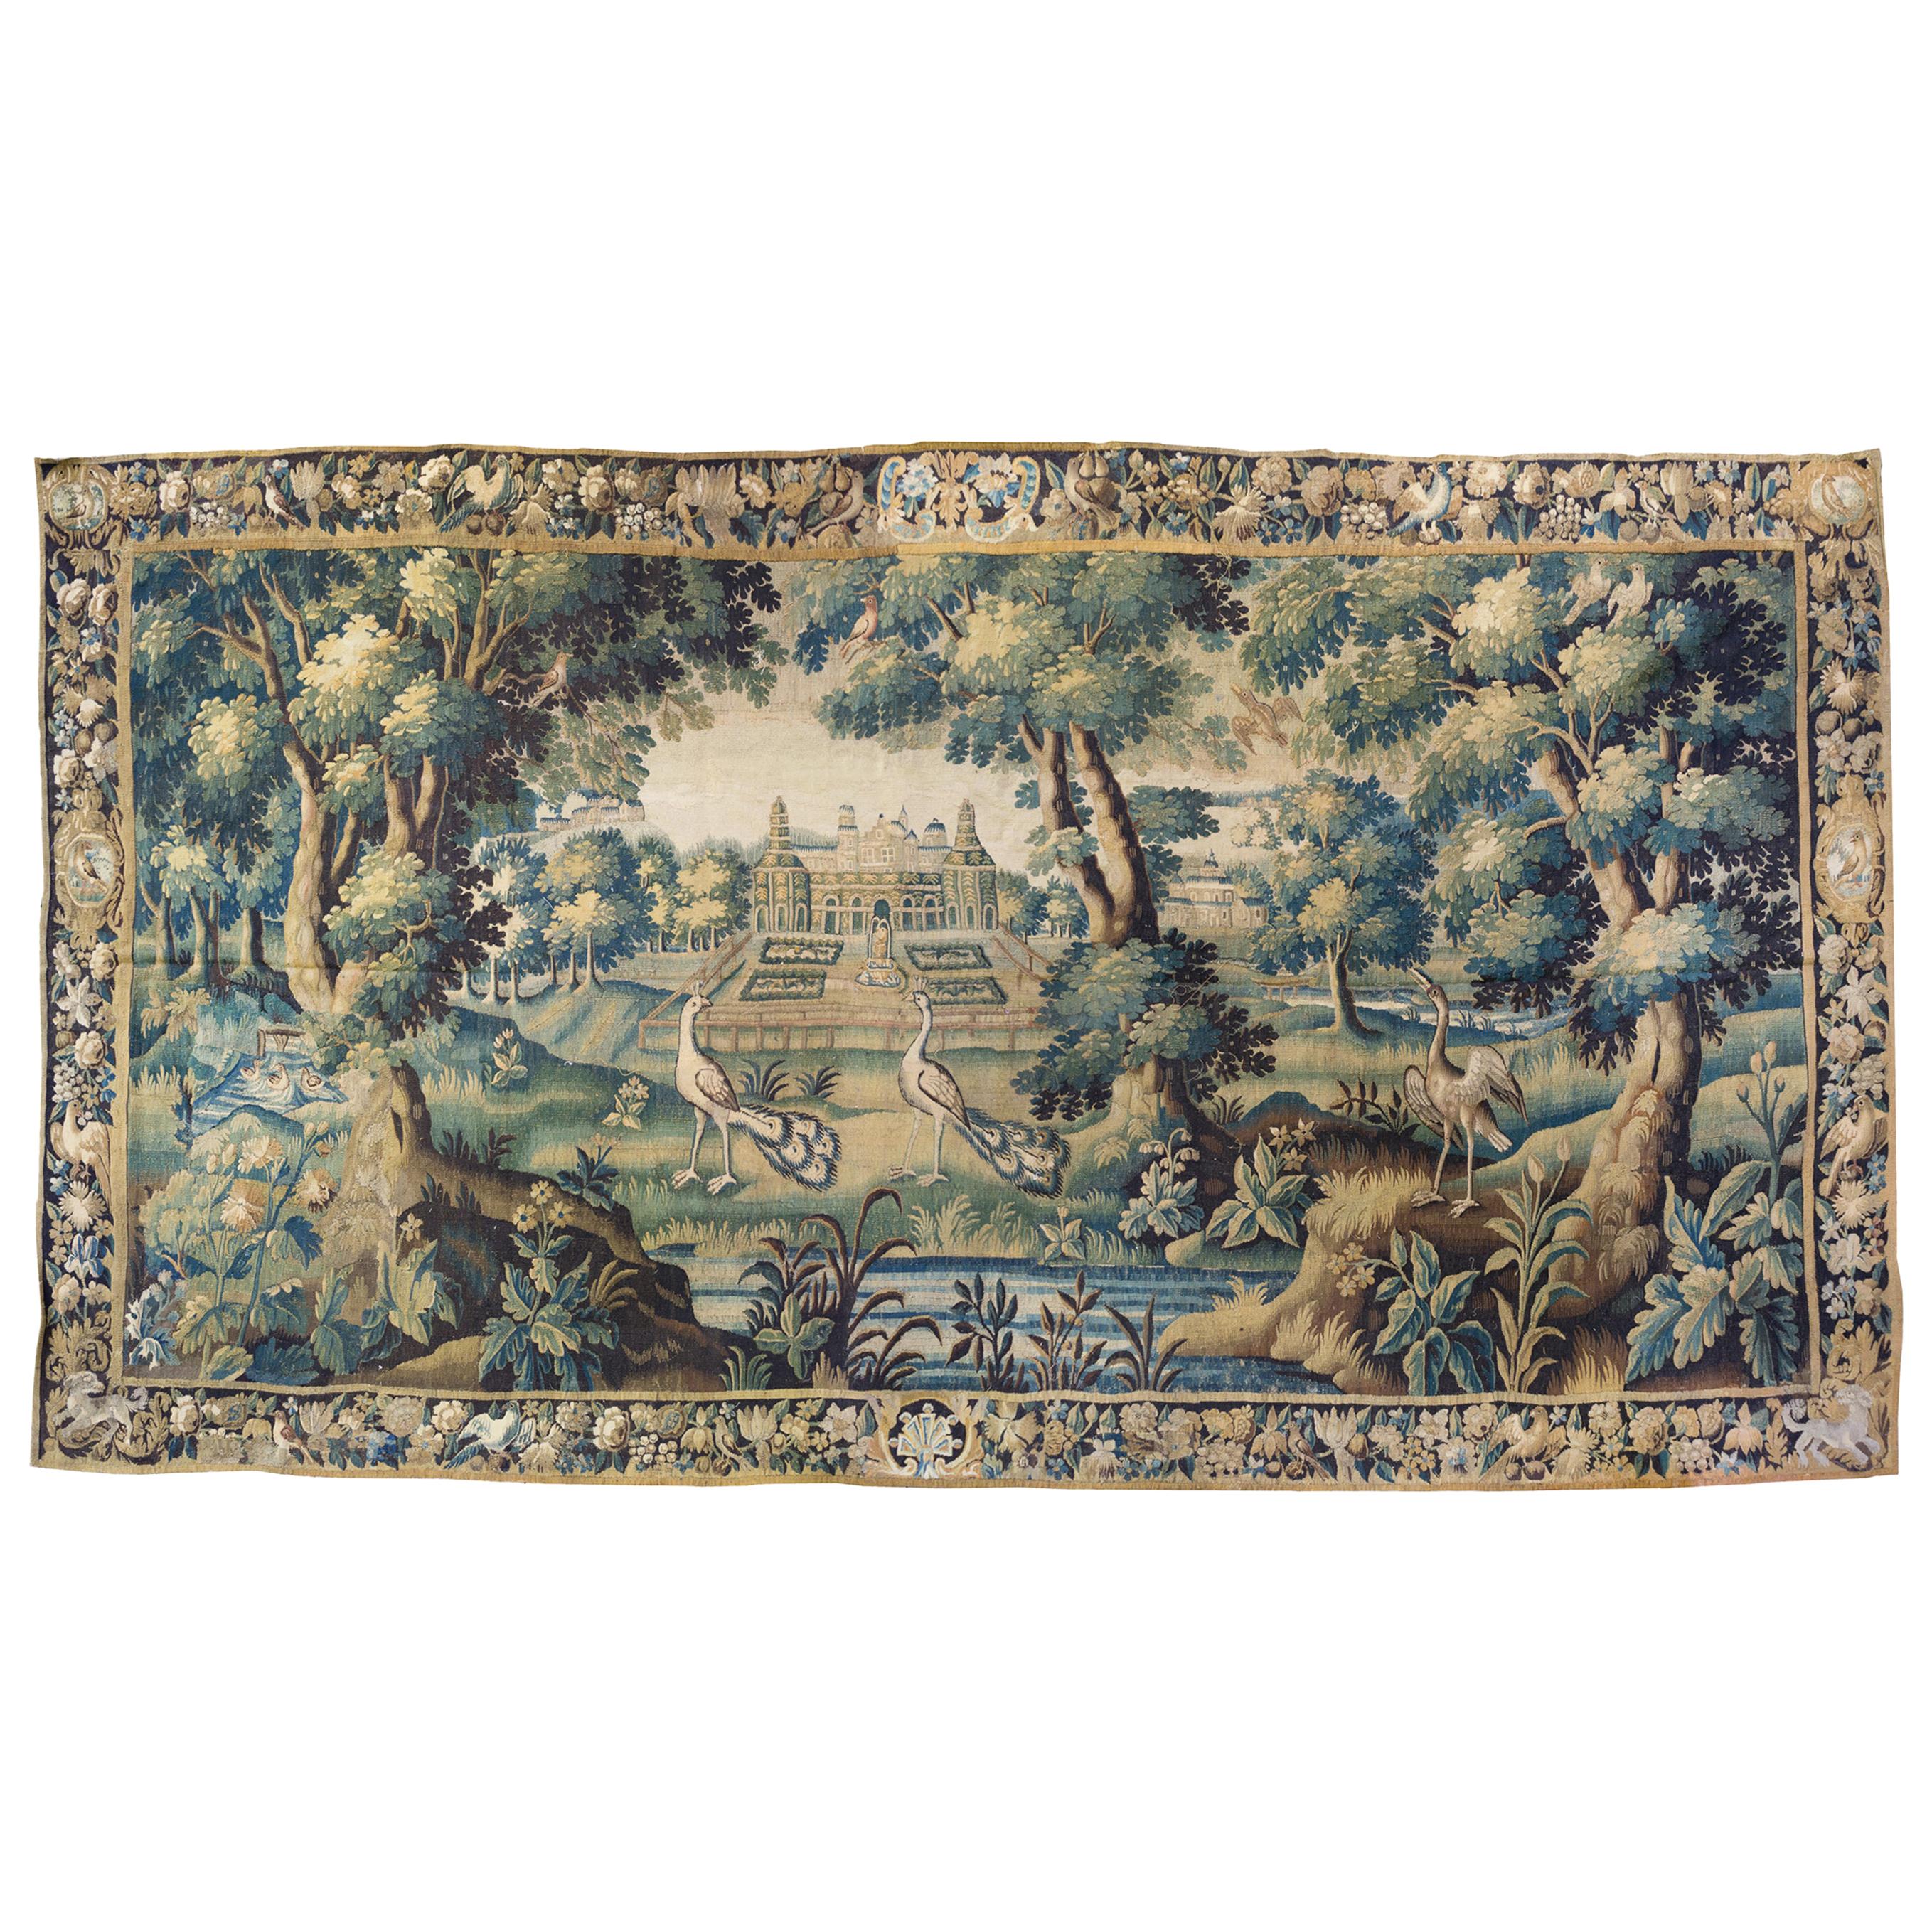 17th Century Flemish Verdure Landscape Tapestry with Peacocks